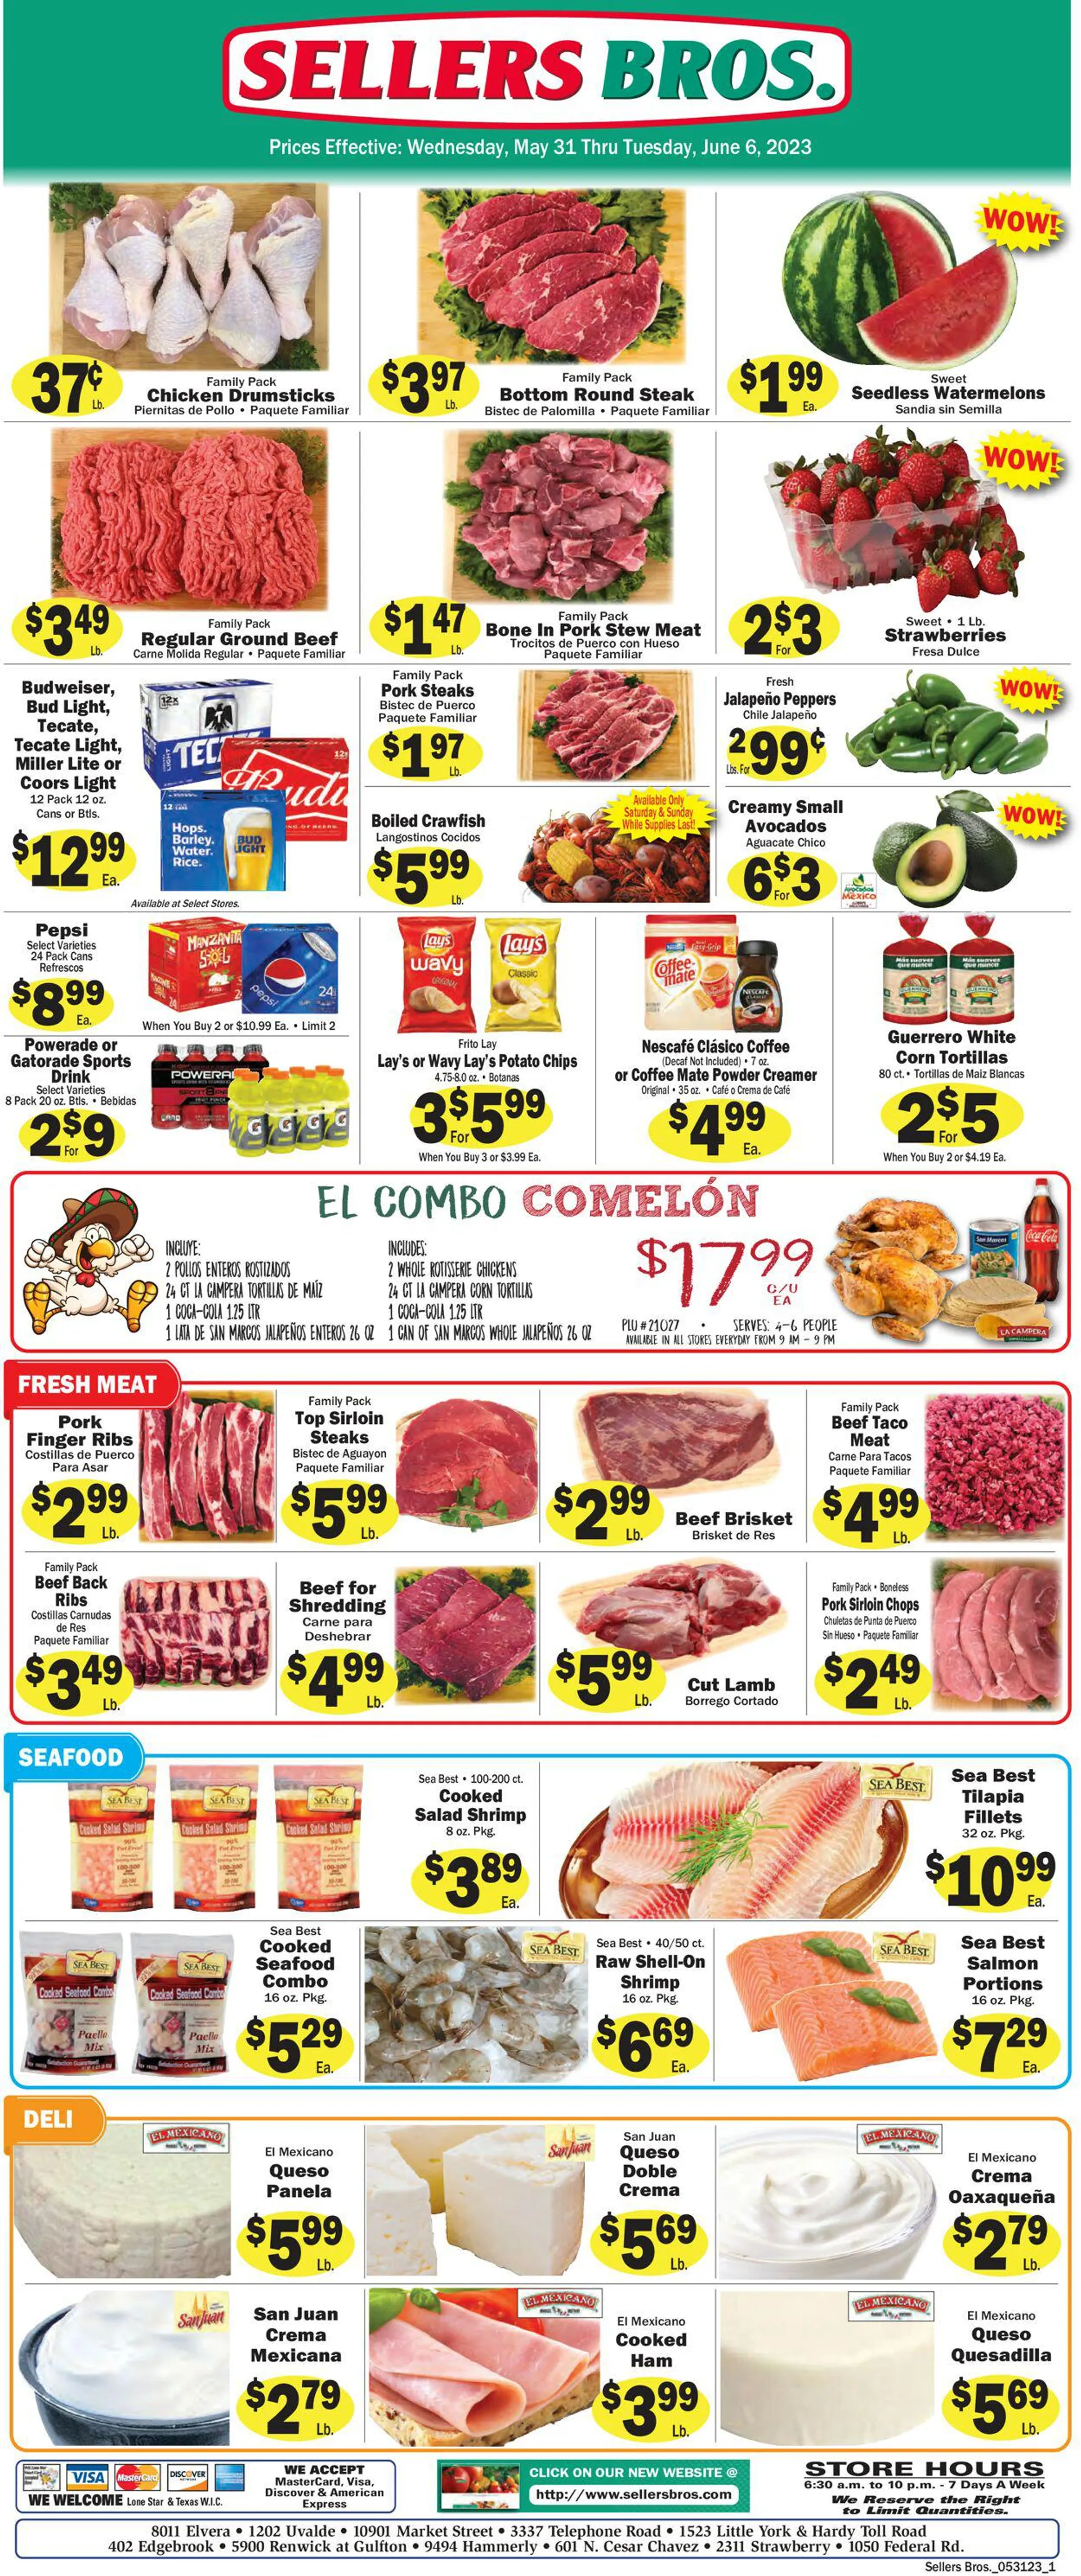 Sellers Bros. Current weekly ad - 1